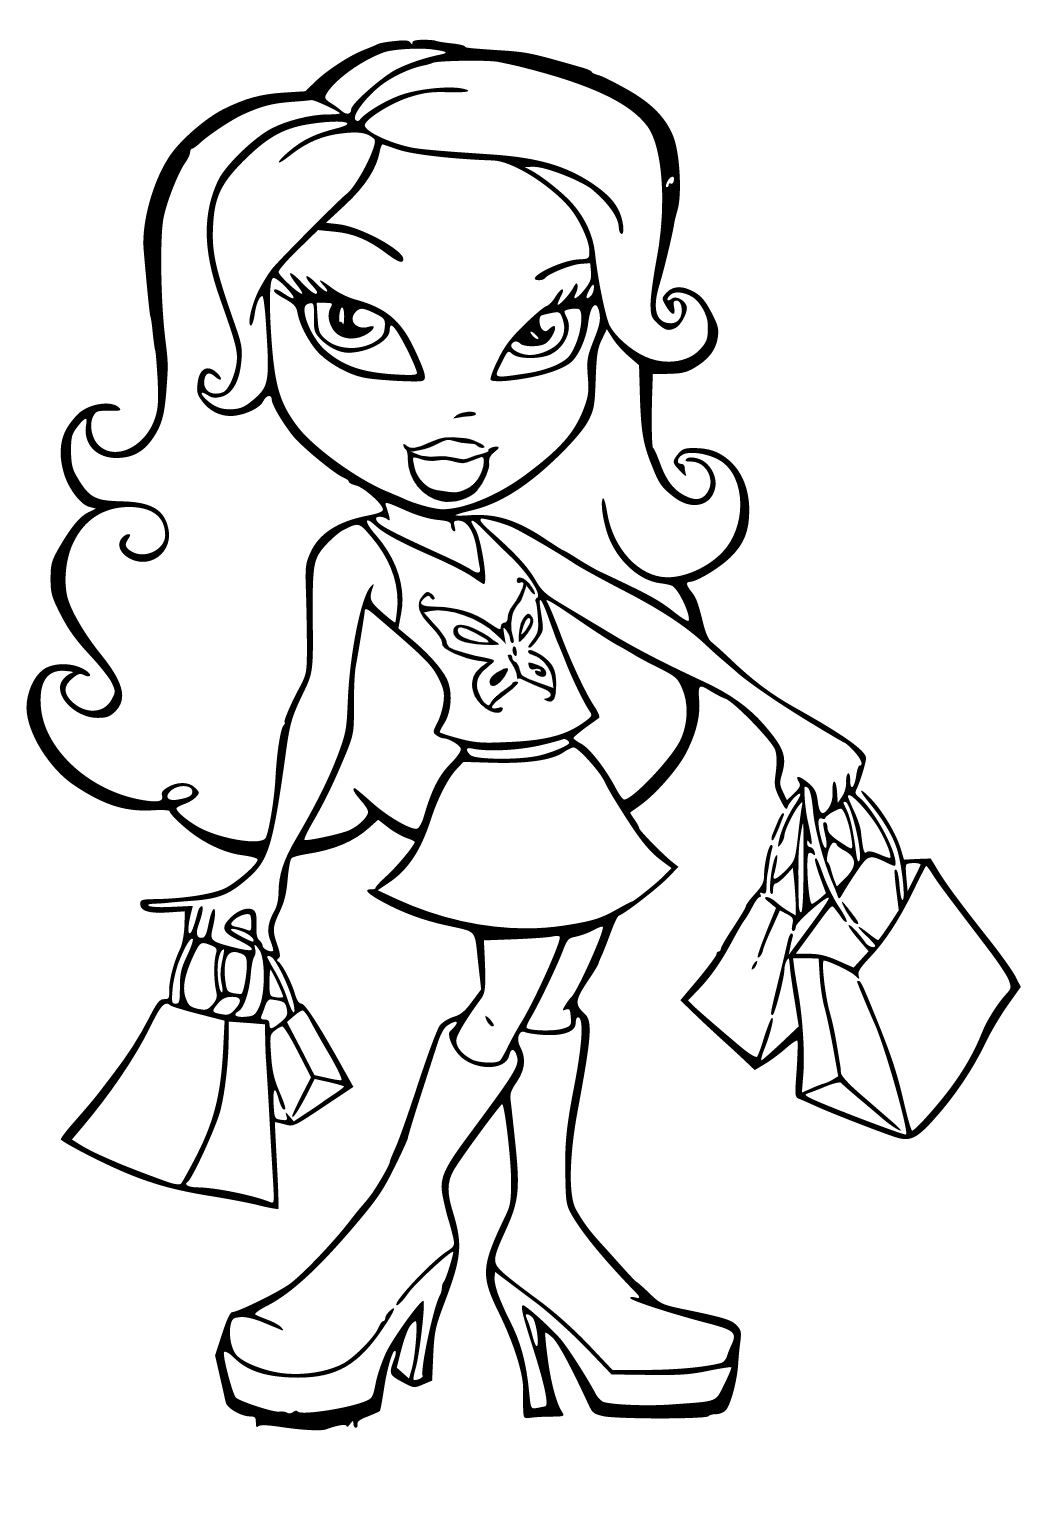 Free printable bratz shopping coloring page for adults and kids